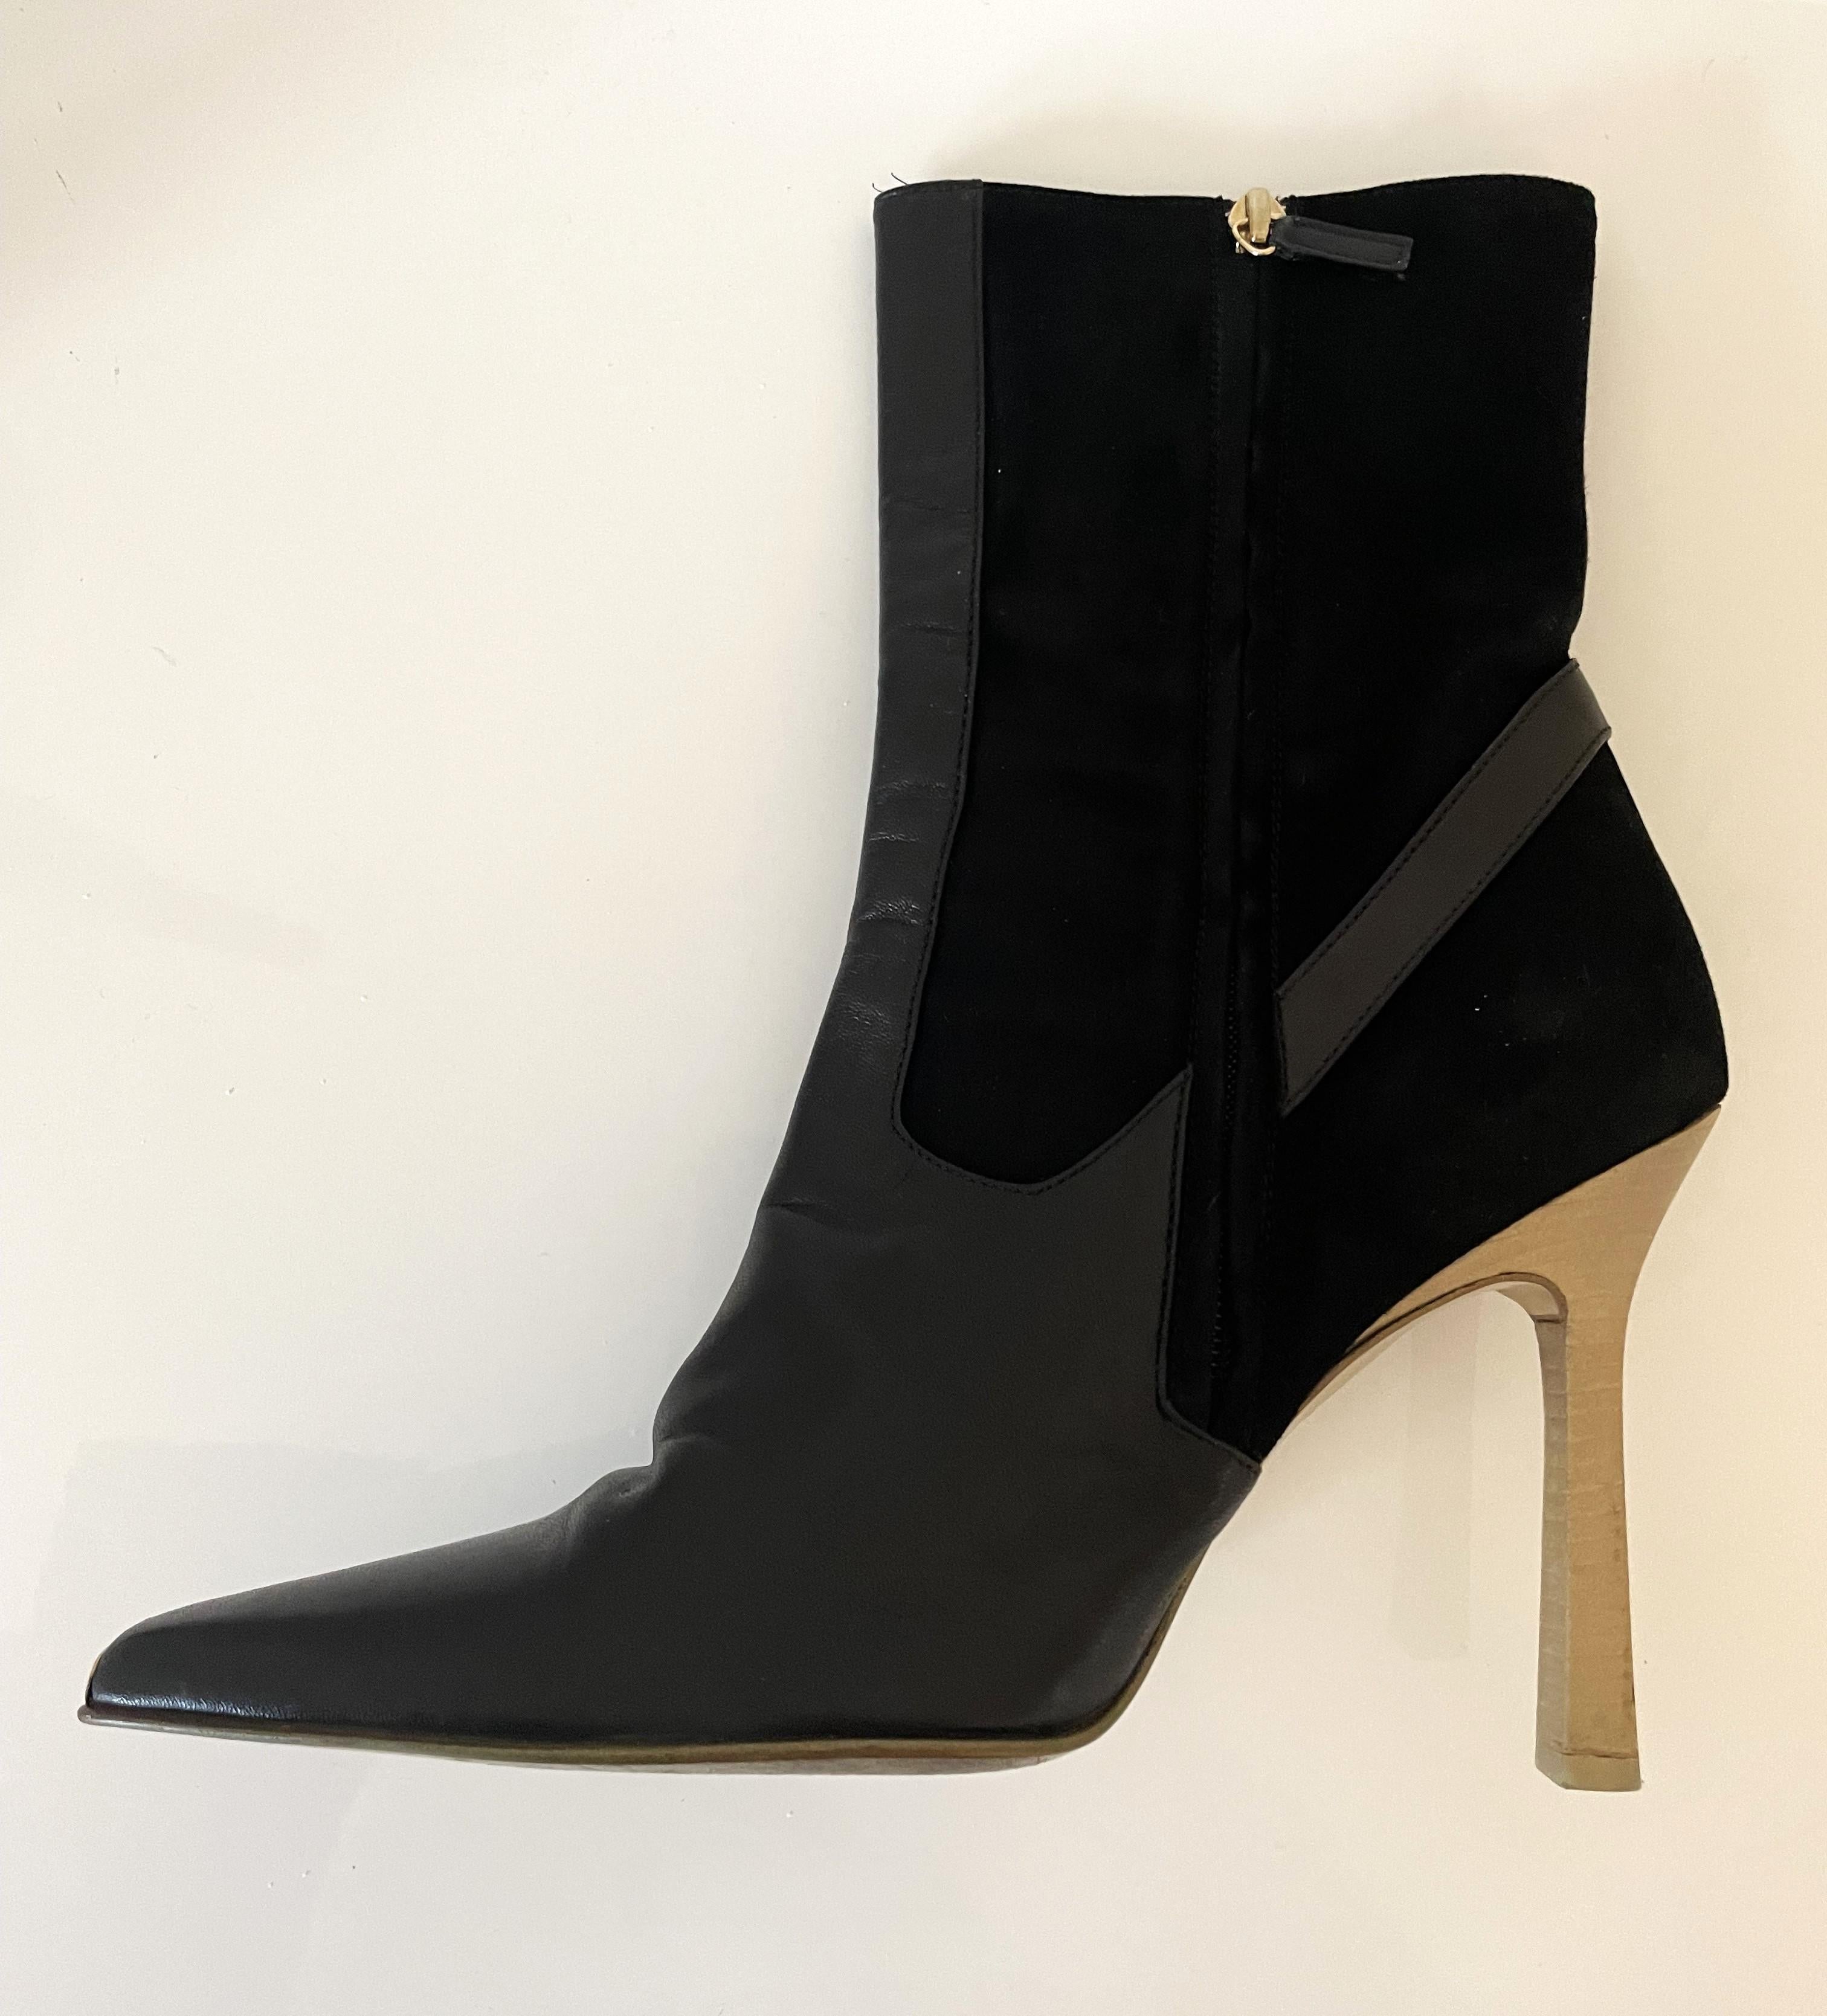 Gucci Rare Black Suede Leather High Heel Ankle Boots Gold Metal Panther For Sale 3